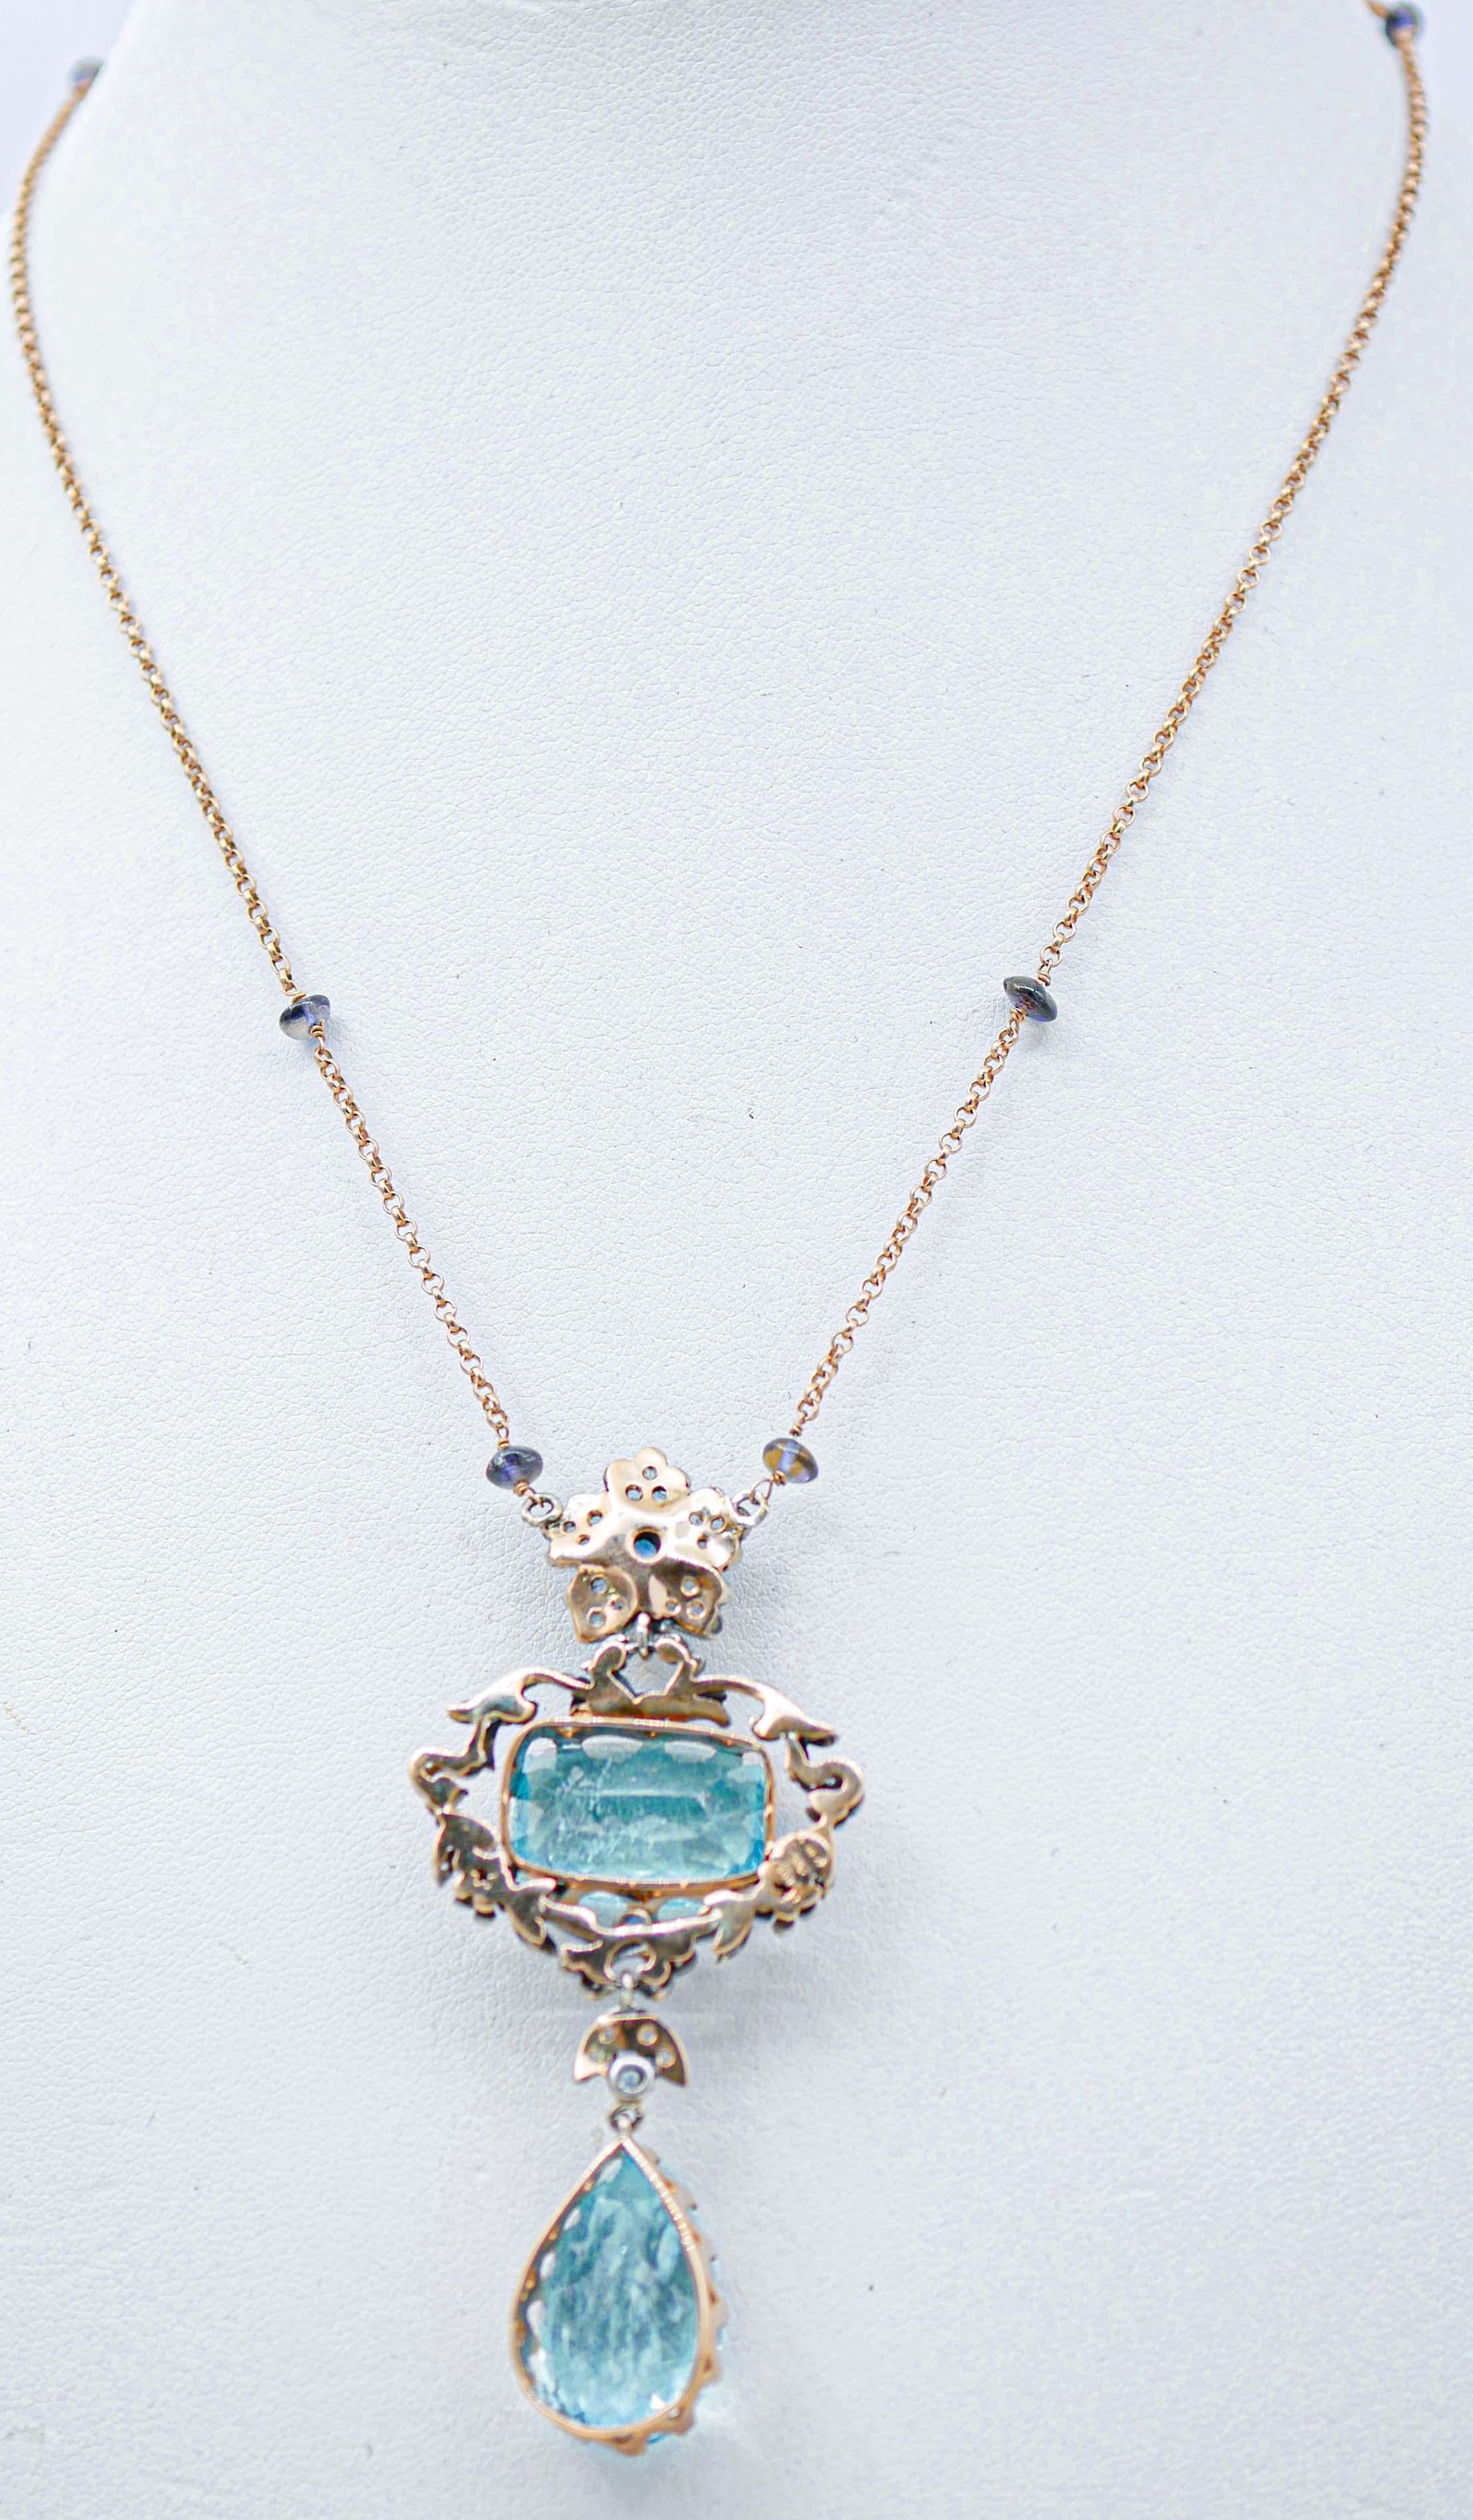 Mixed Cut Aquamarine, Tanzanite, Sapphires, Diamonds,  Gold and Silver Pendant Necklace For Sale